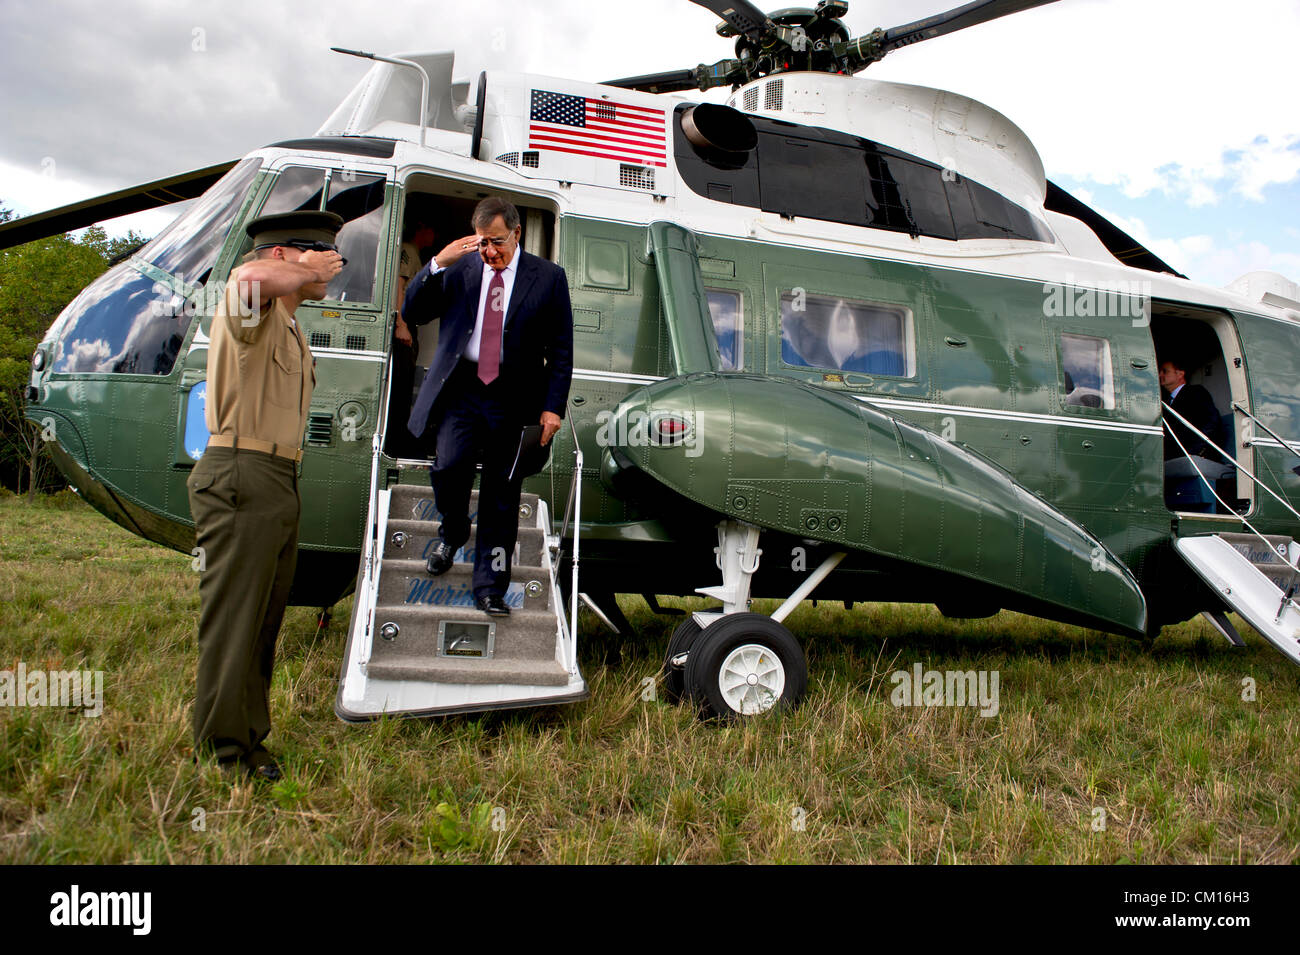 US, Secretary of Defense Leon Panetta arrives at the Flight 93 Memorial Plaza in Shanksville, Pennsylvania to pay respects to those killed during the 9/11 attacks the day before the anniversary September 10, 2012. Stock Photo